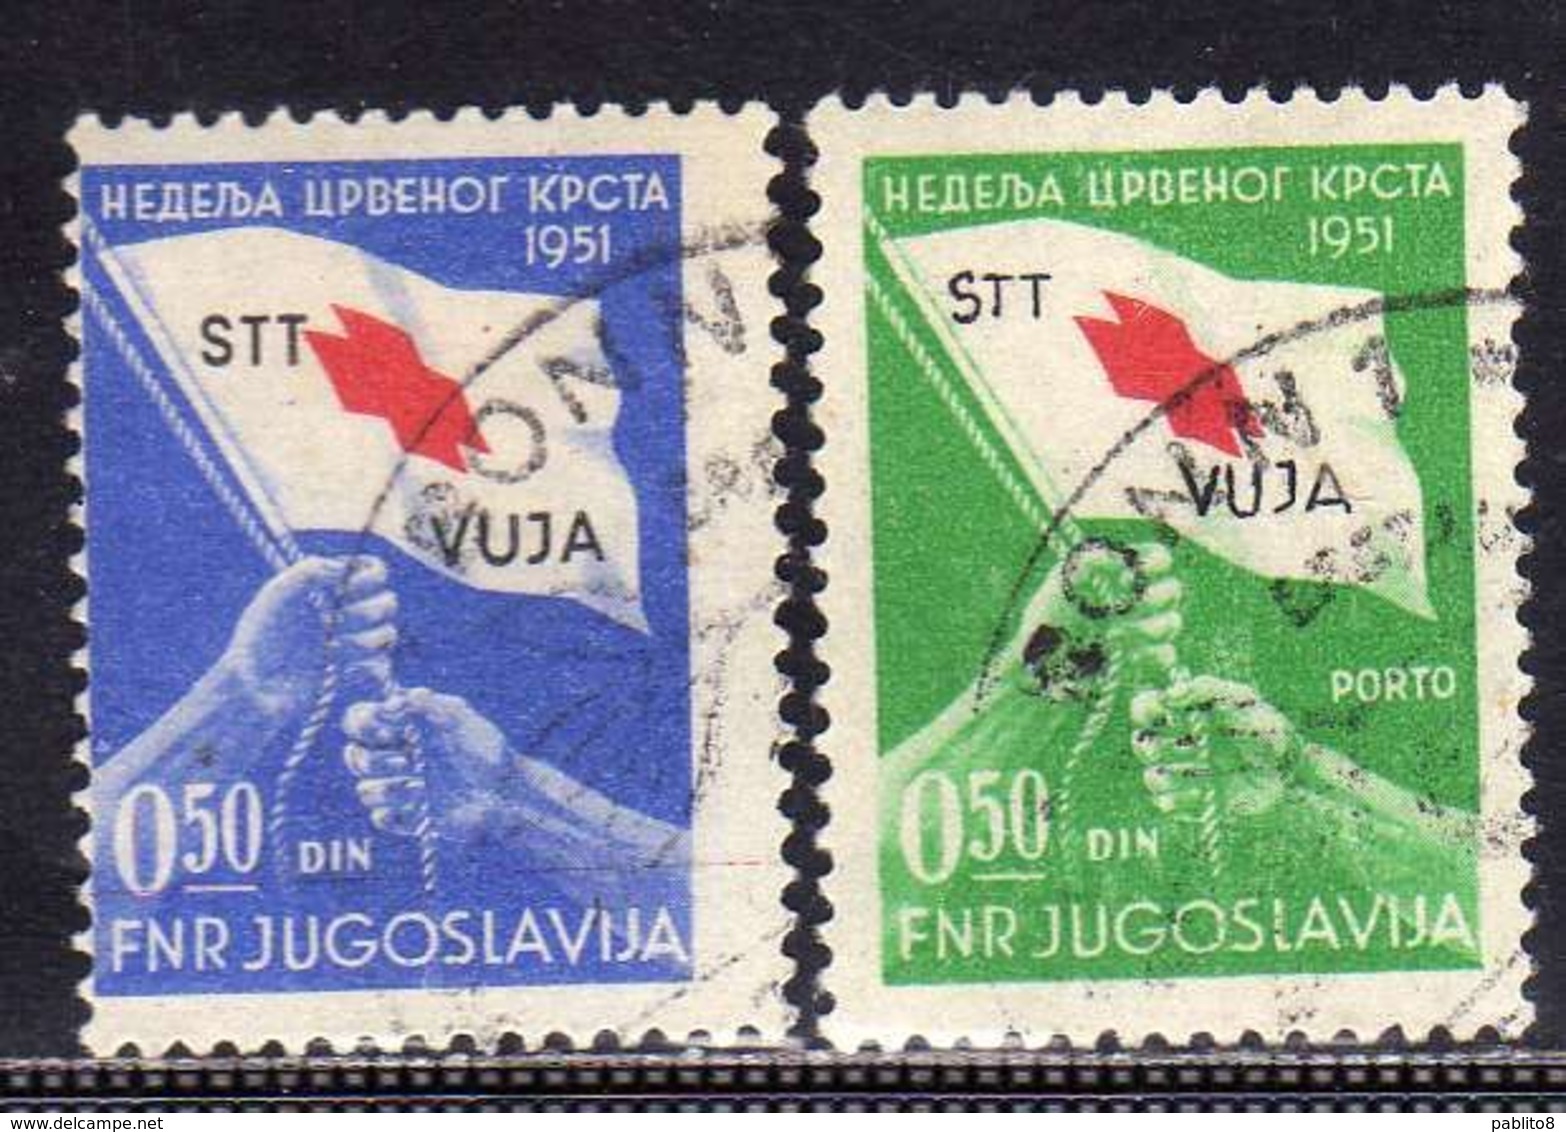 TRIESTE B 1951 CROCE ROSSA RED CROSS CROIX ROUGE SERIE COMPLETA COMPLETE SET USATA USED OBLITERE' - Afgestempeld